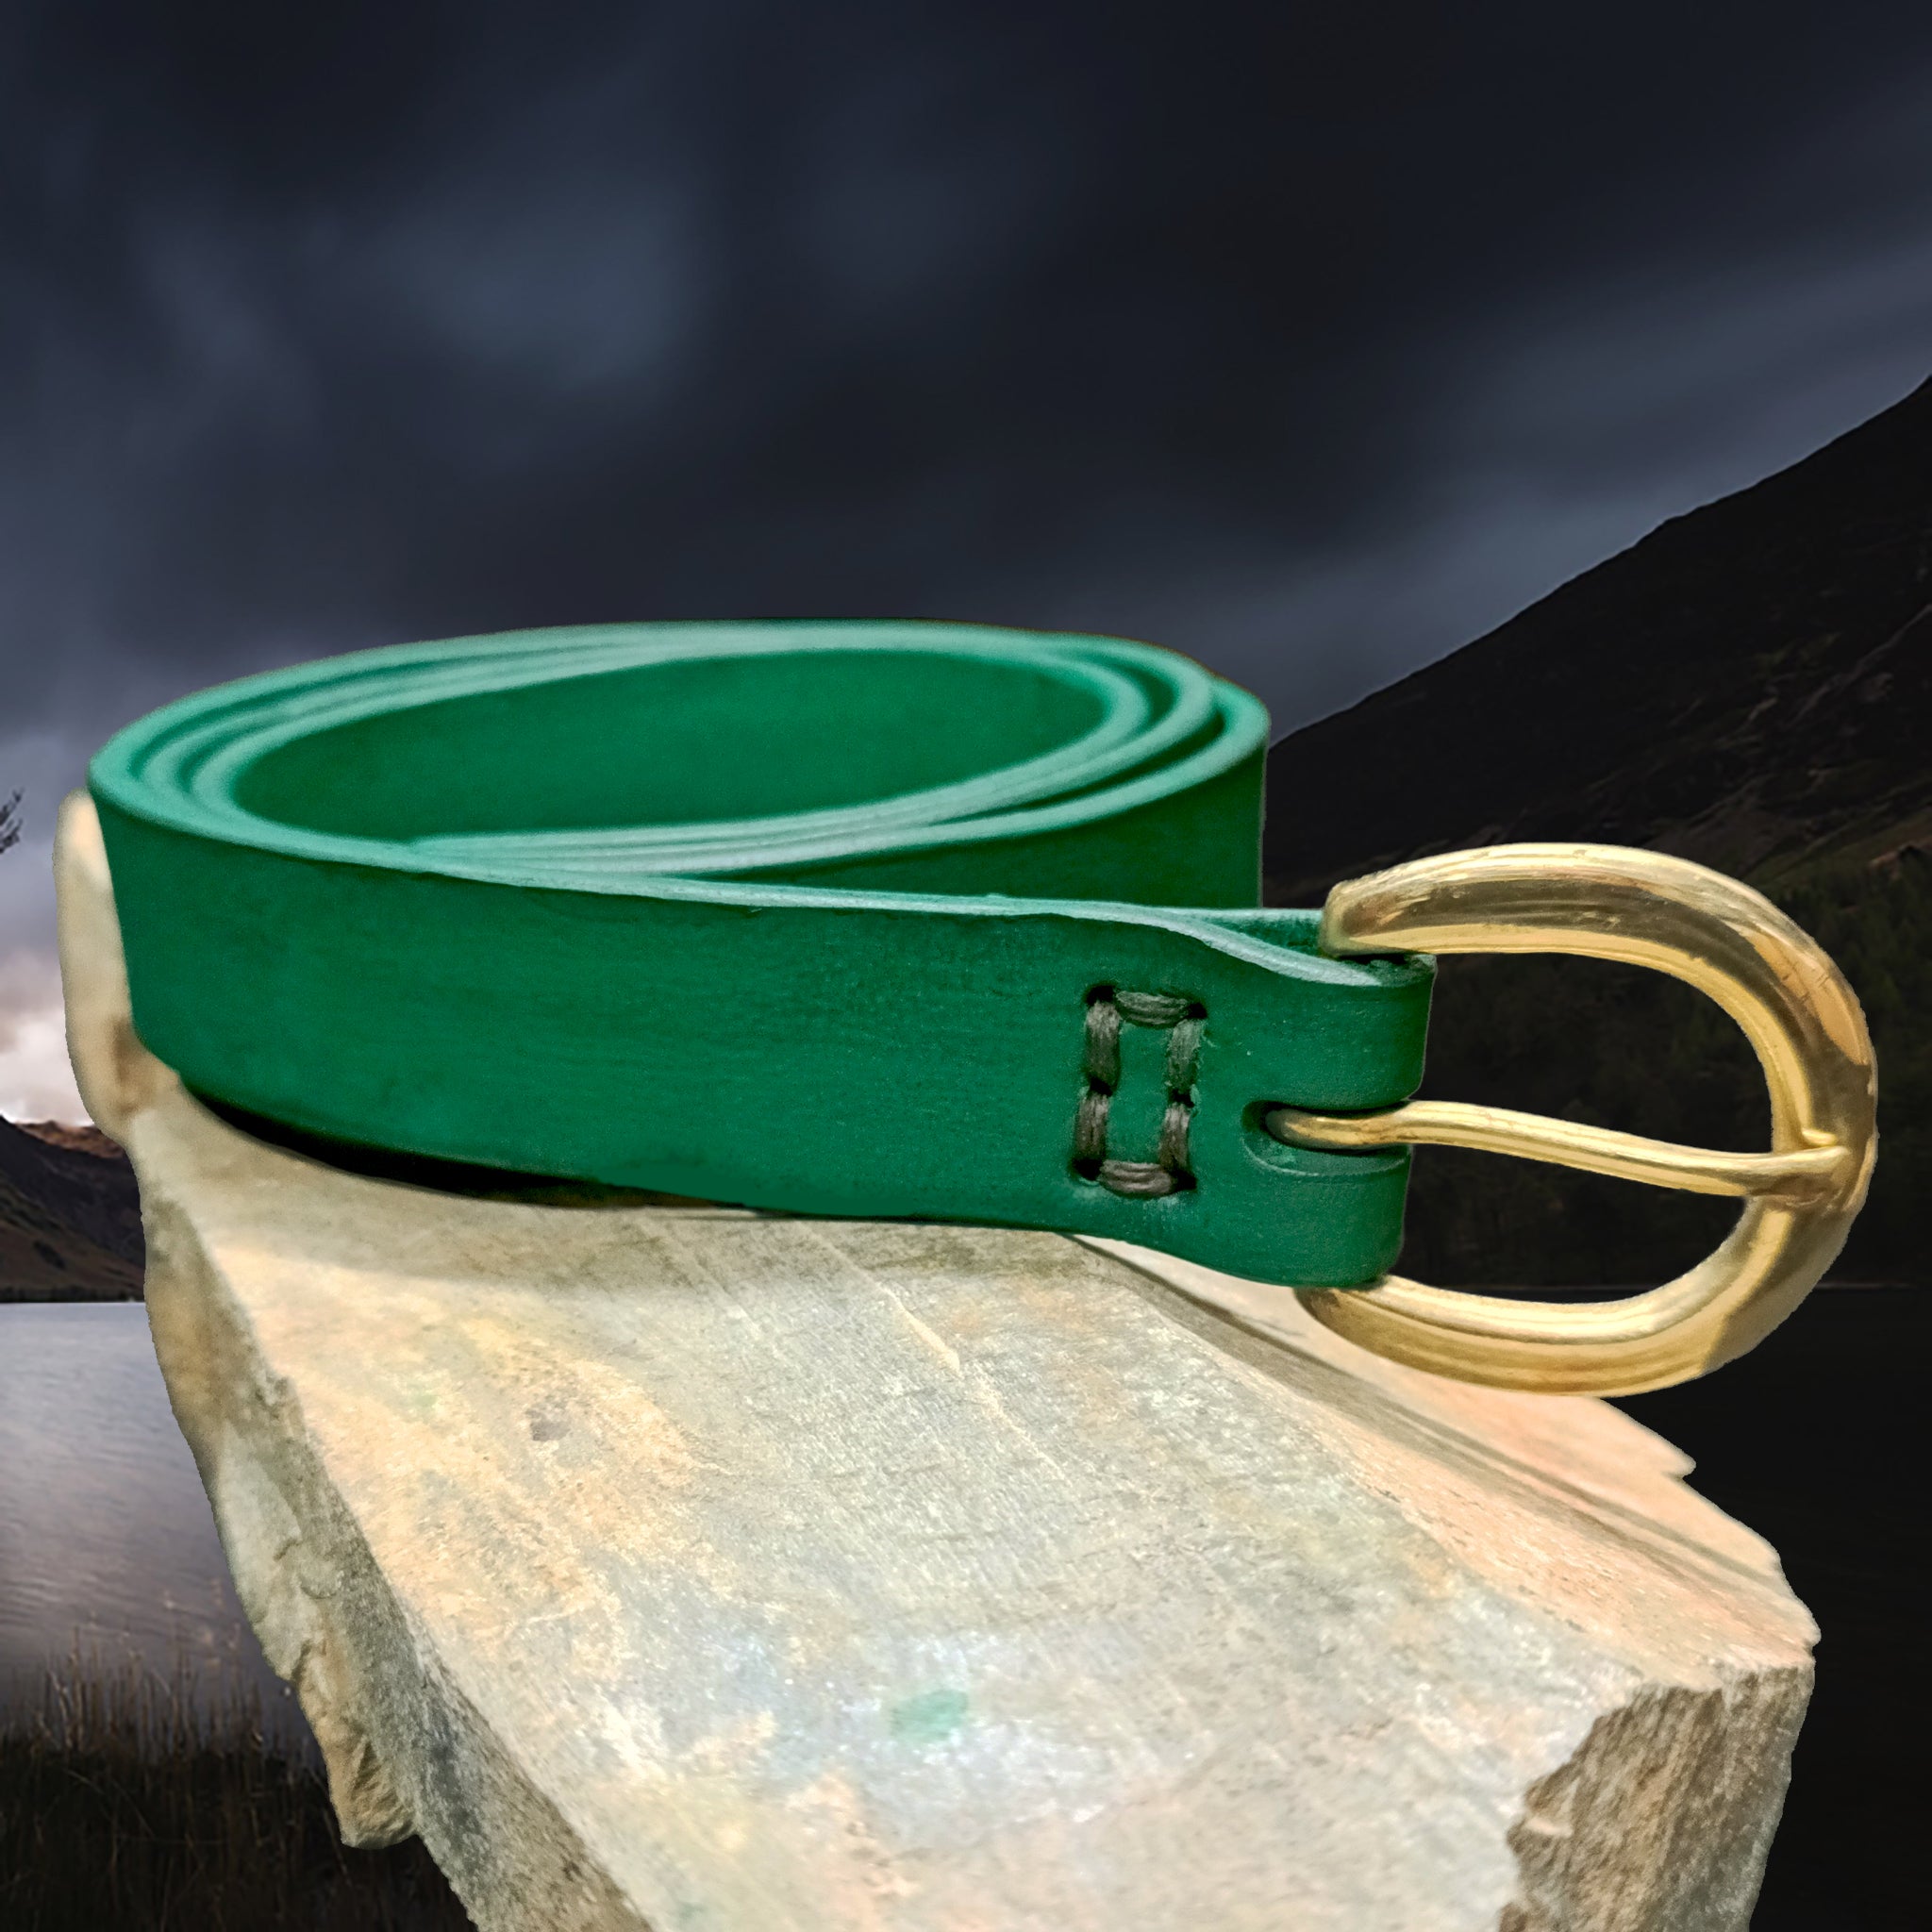 1 Inch Wide (25mm) Green Leather Viking Belt with Brass Buckle on Rock